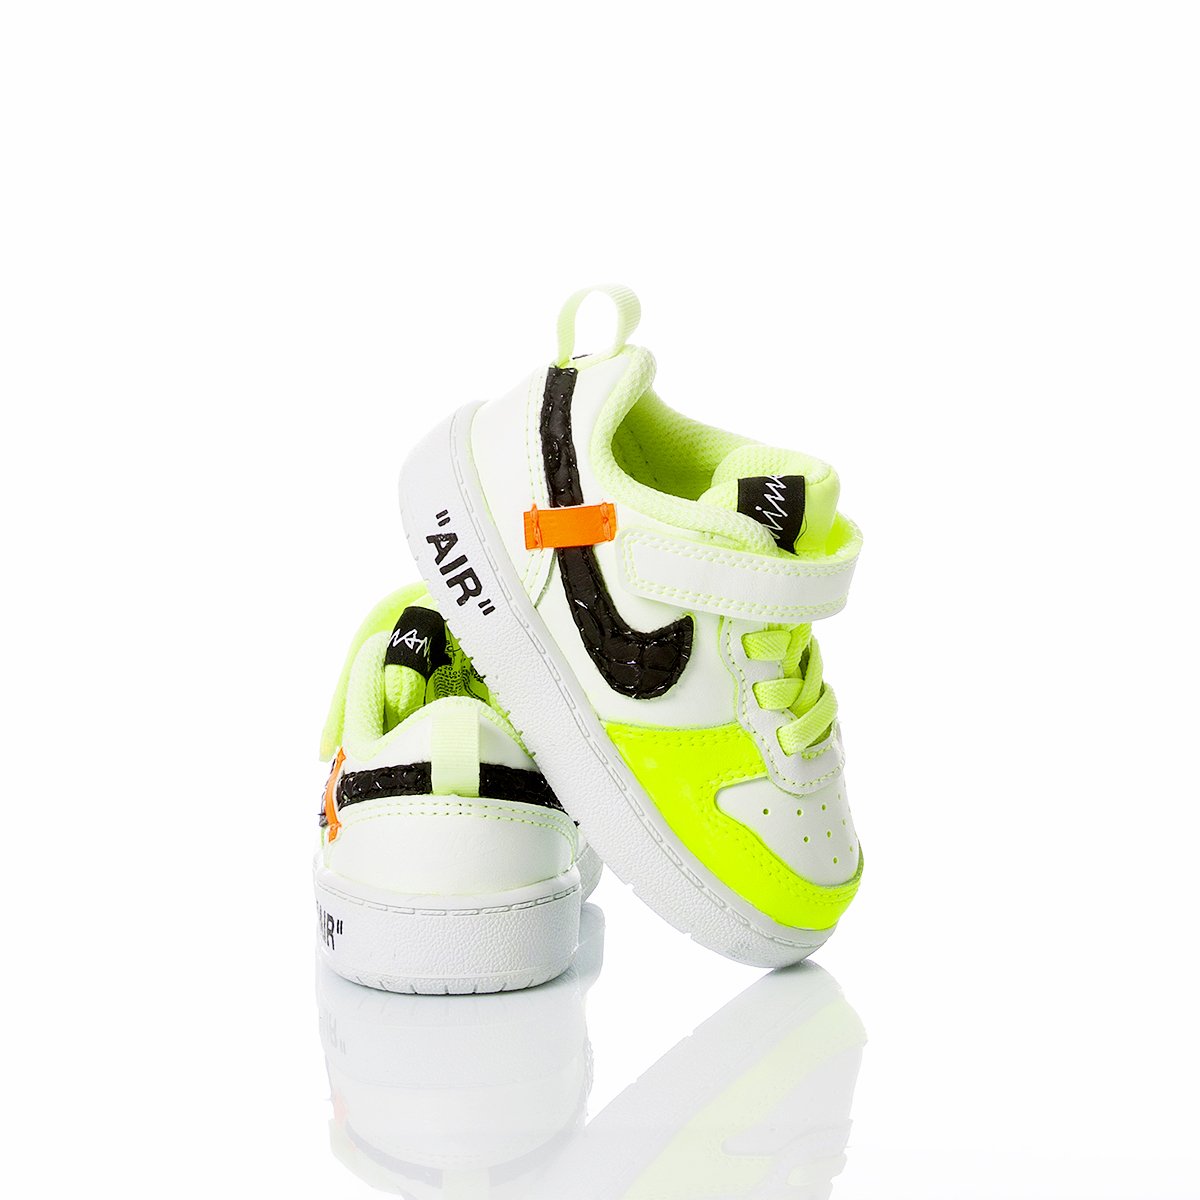 Nike Washed Baby Acid Air Force Vision Special